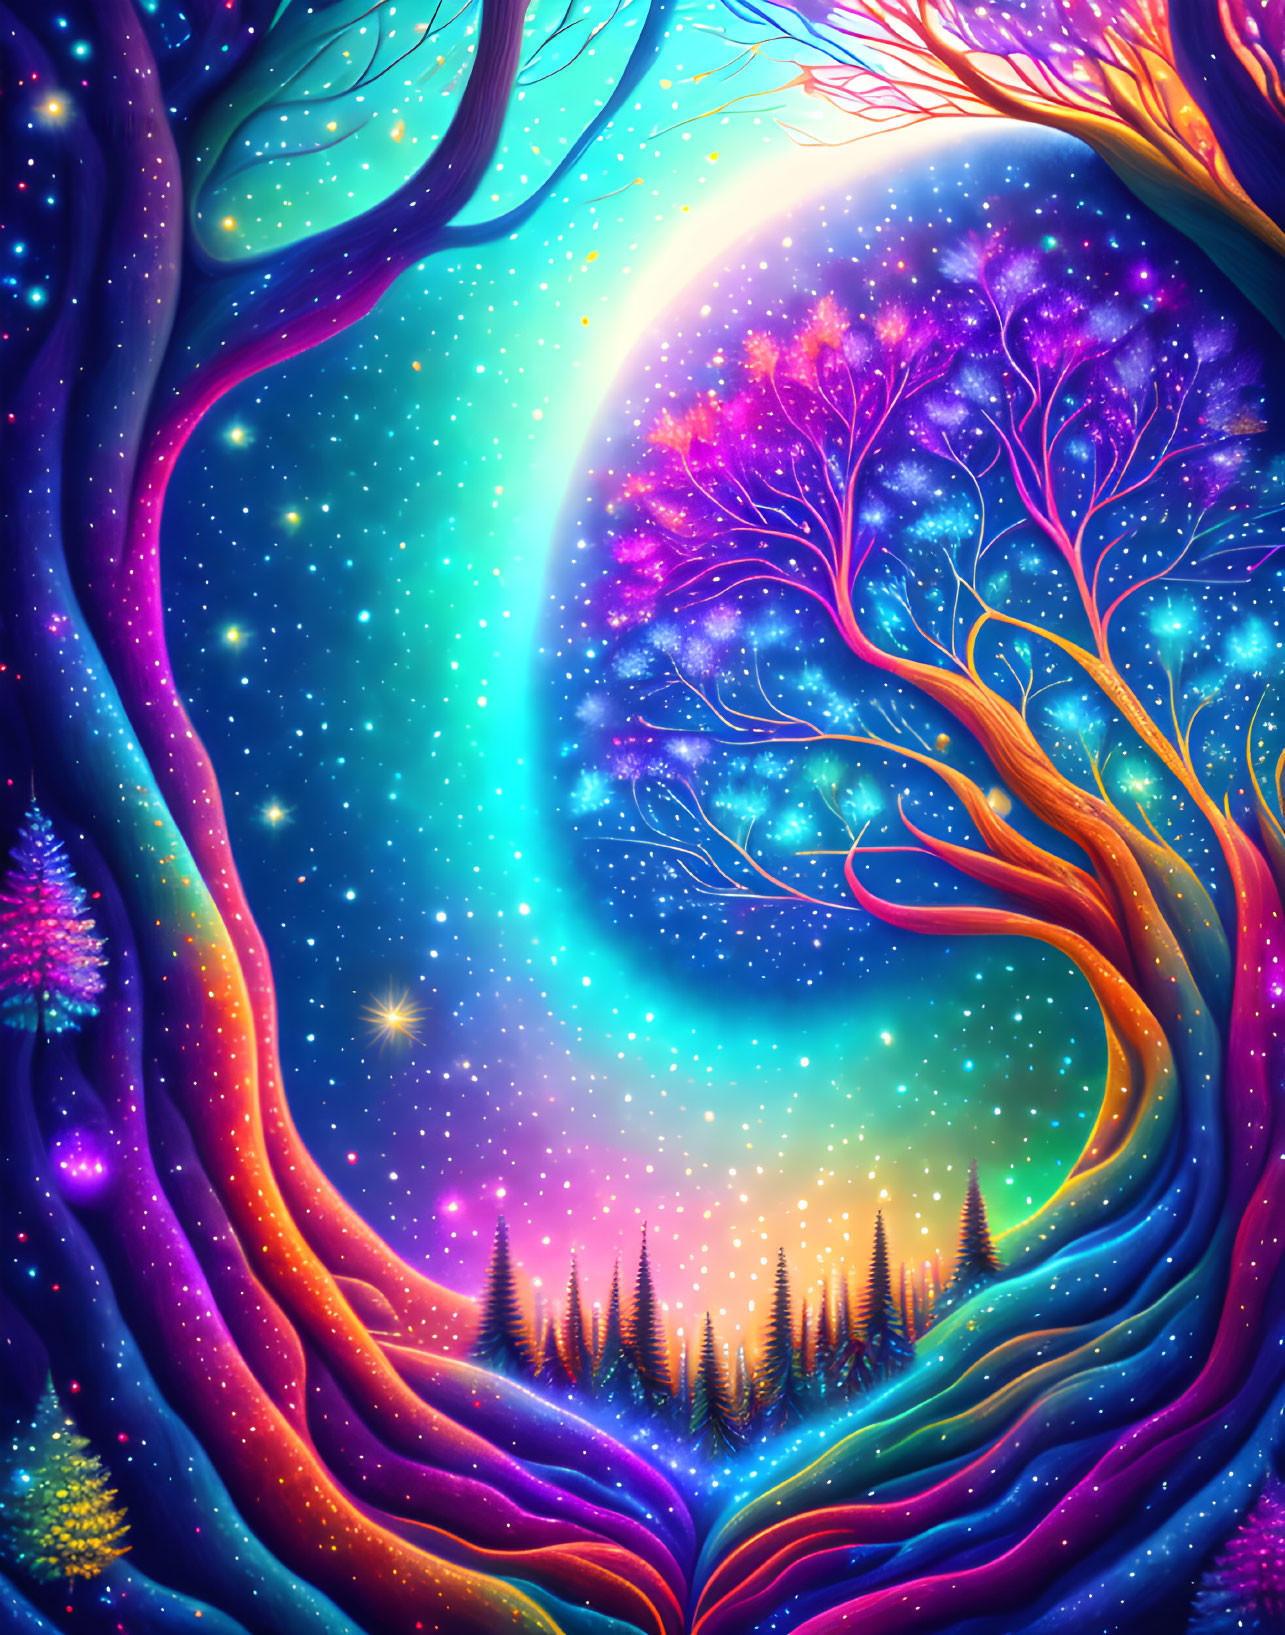 Colorful Whimsical Night Sky Illustration with Moon and Vibrant Trees